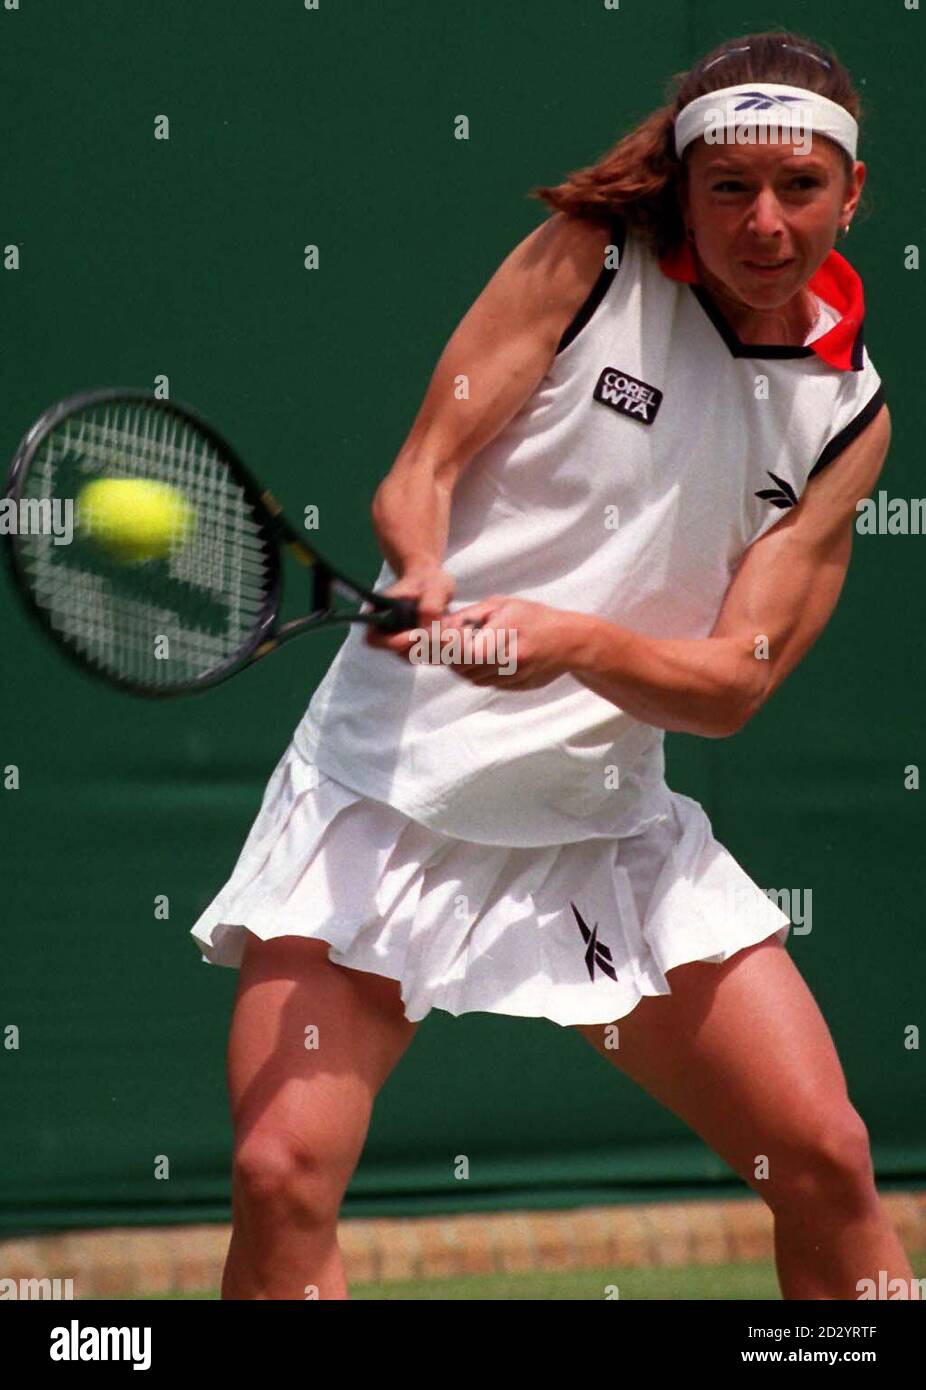 British player Karen Cross on court this morning (Thursday) during her match against Tamarine Tanasugarn of Thailand on day four of the Wimbledon Championships. Photo by Martyn Hayhow/PA. Stock Photo